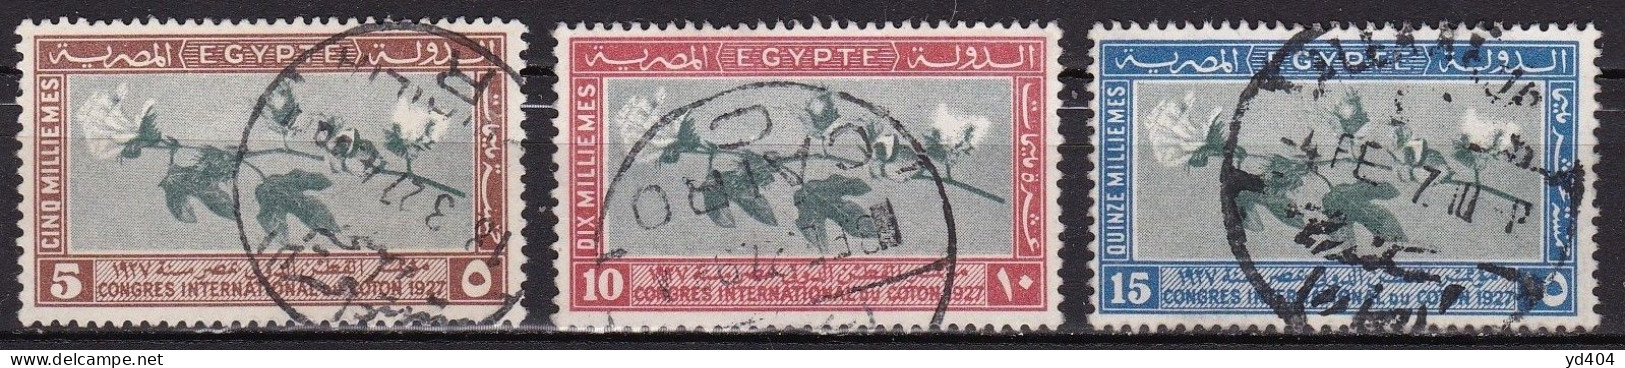 EG061 – EGYPTE – EGYPT – 1927 – INTERNATIONAL COTTON CONGRESS - Y&T # 115/117 USED - Used Stamps